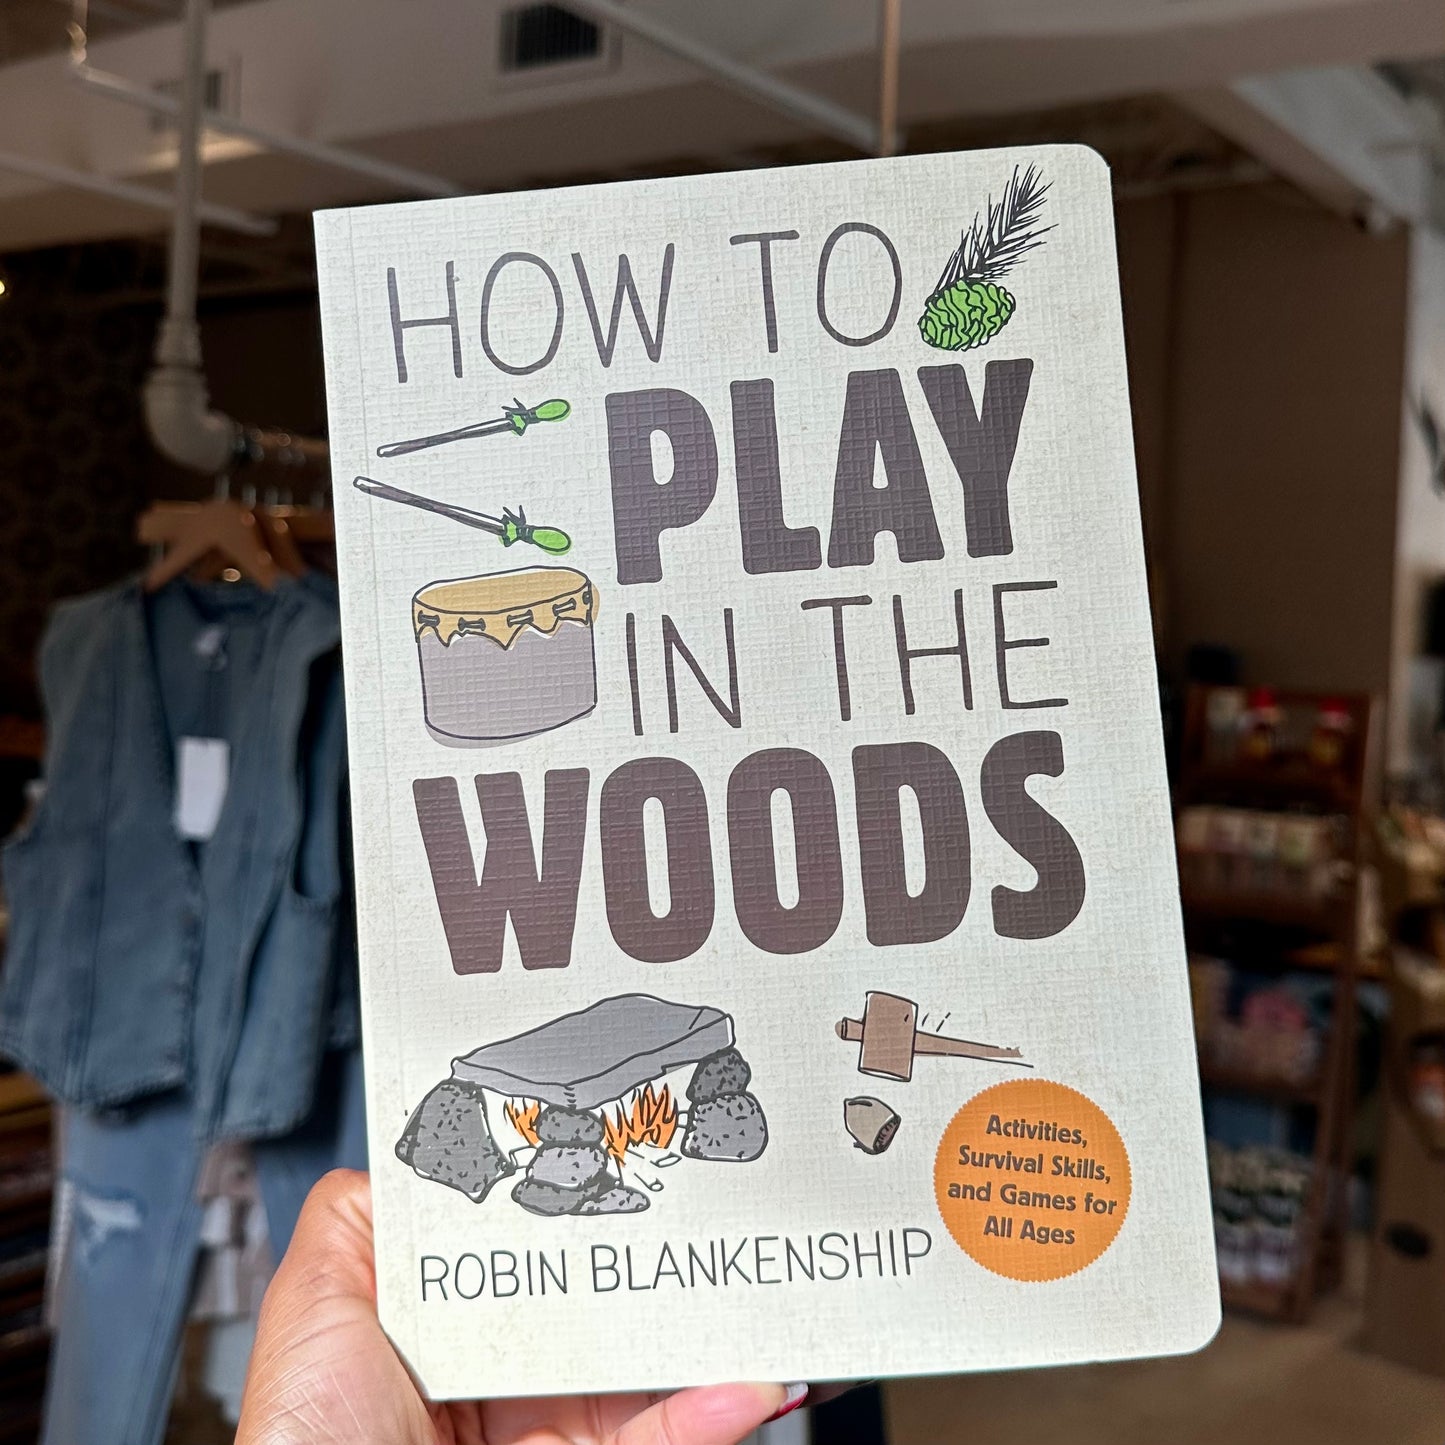 How to Play in the Woods: Activities, Survival Skills & Game